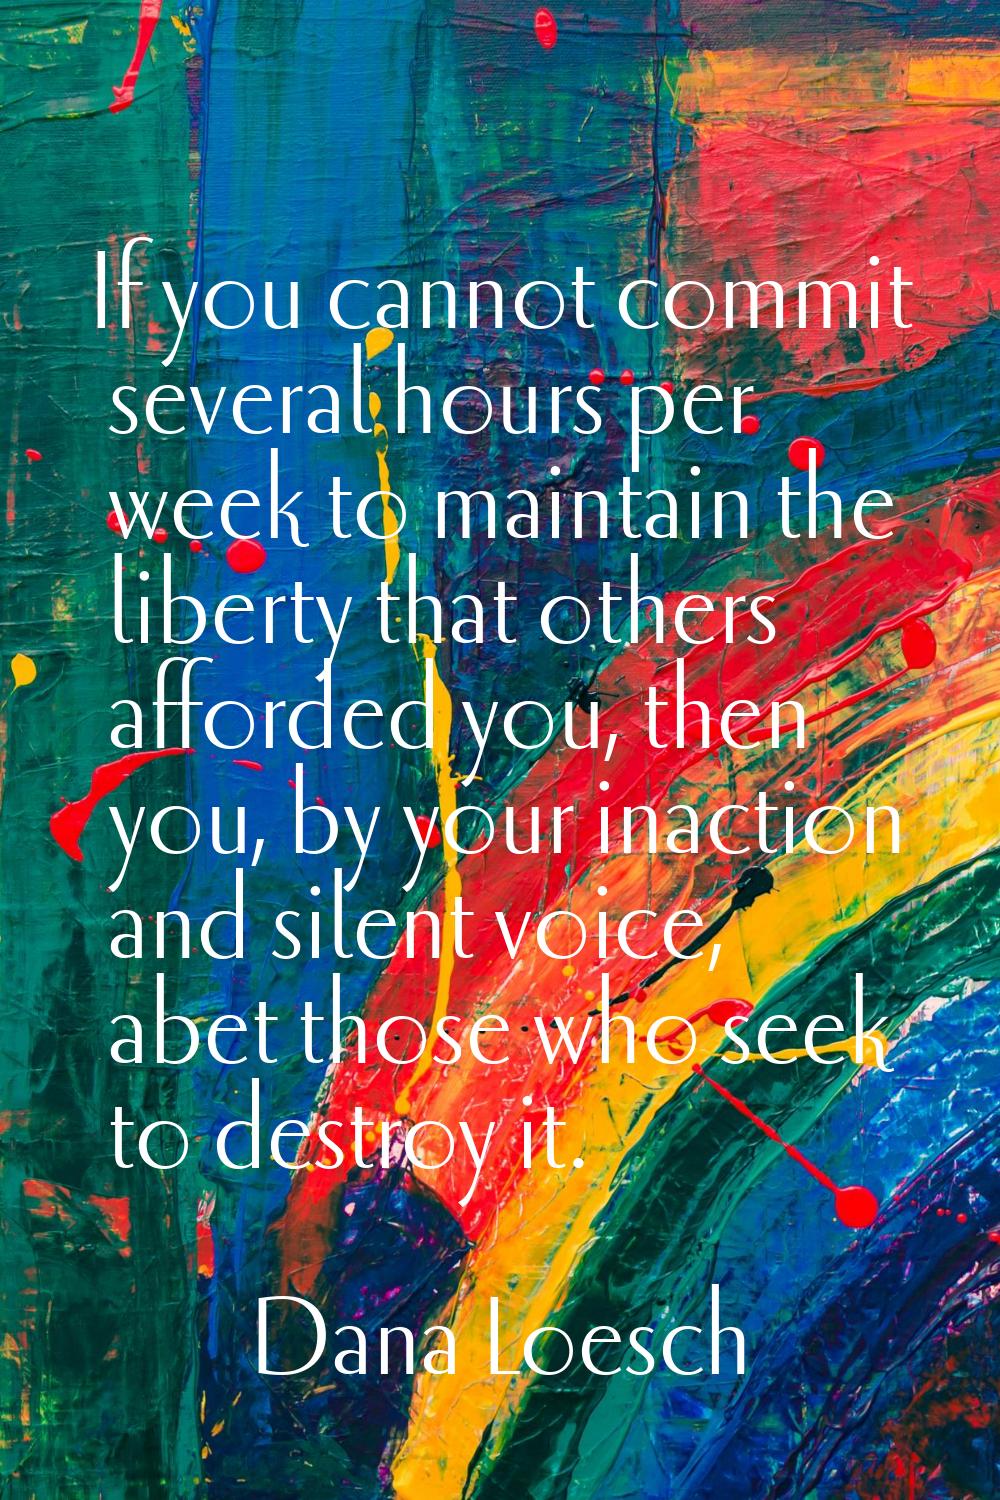 If you cannot commit several hours per week to maintain the liberty that others afforded you, then 